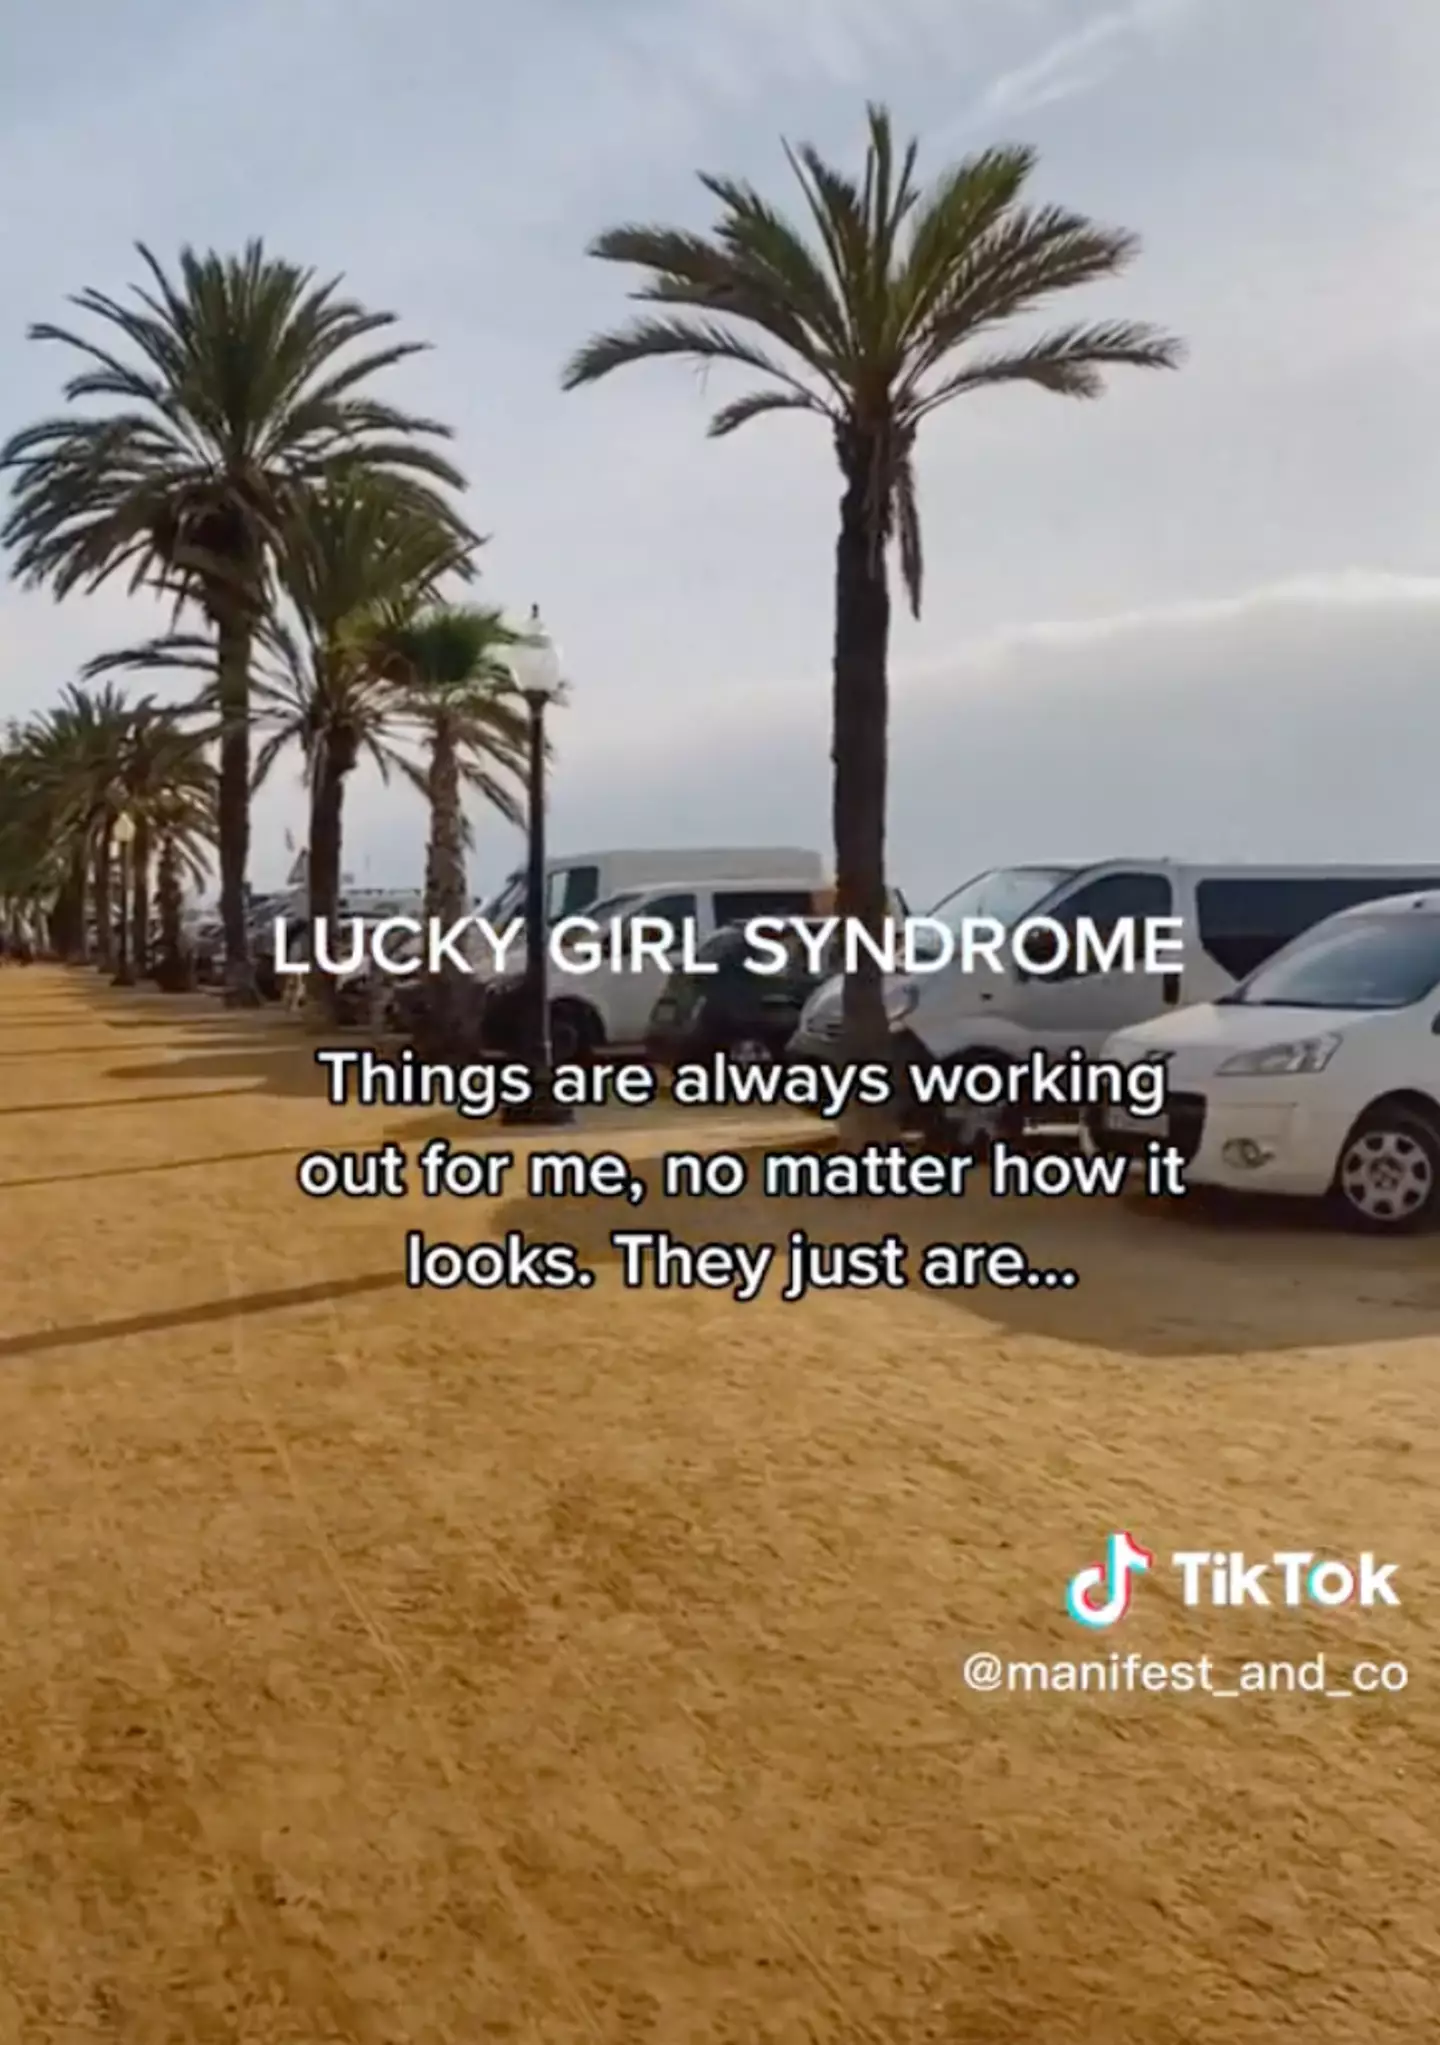 The 'lucky girl' syndrome is a viral sensation.